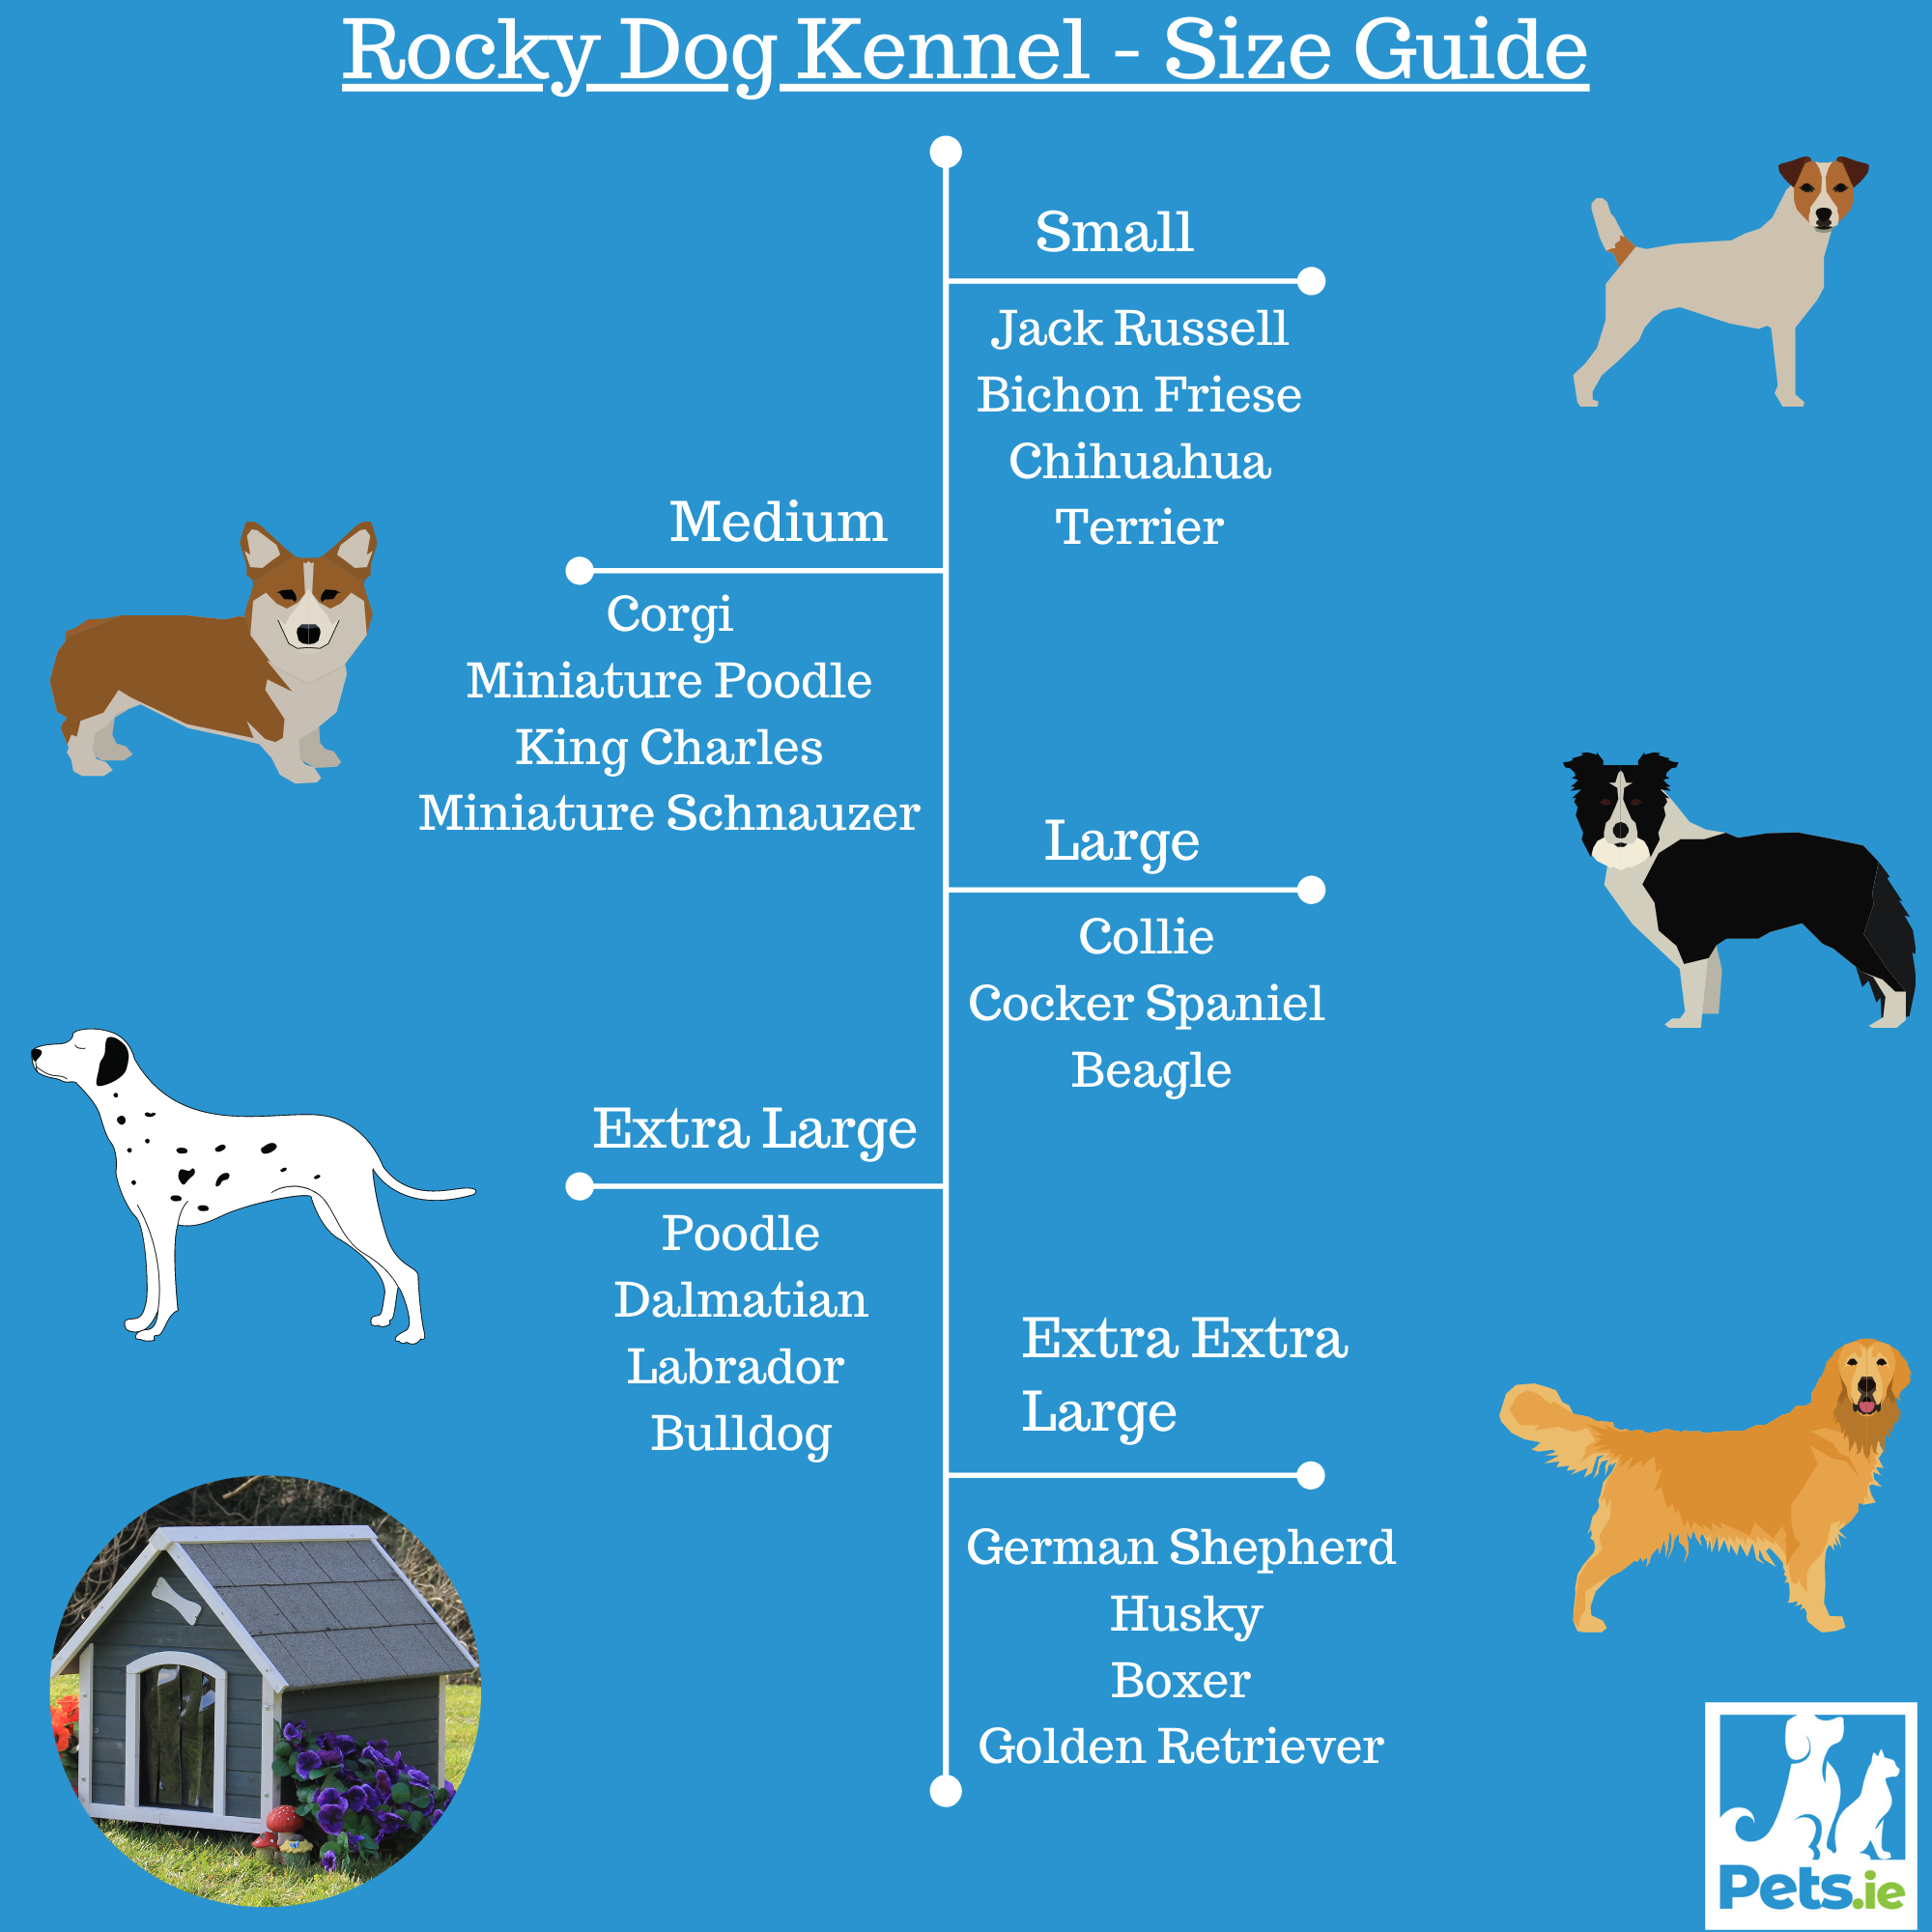 Rock_Dog_Kennel_-_Size_Guide_final.png